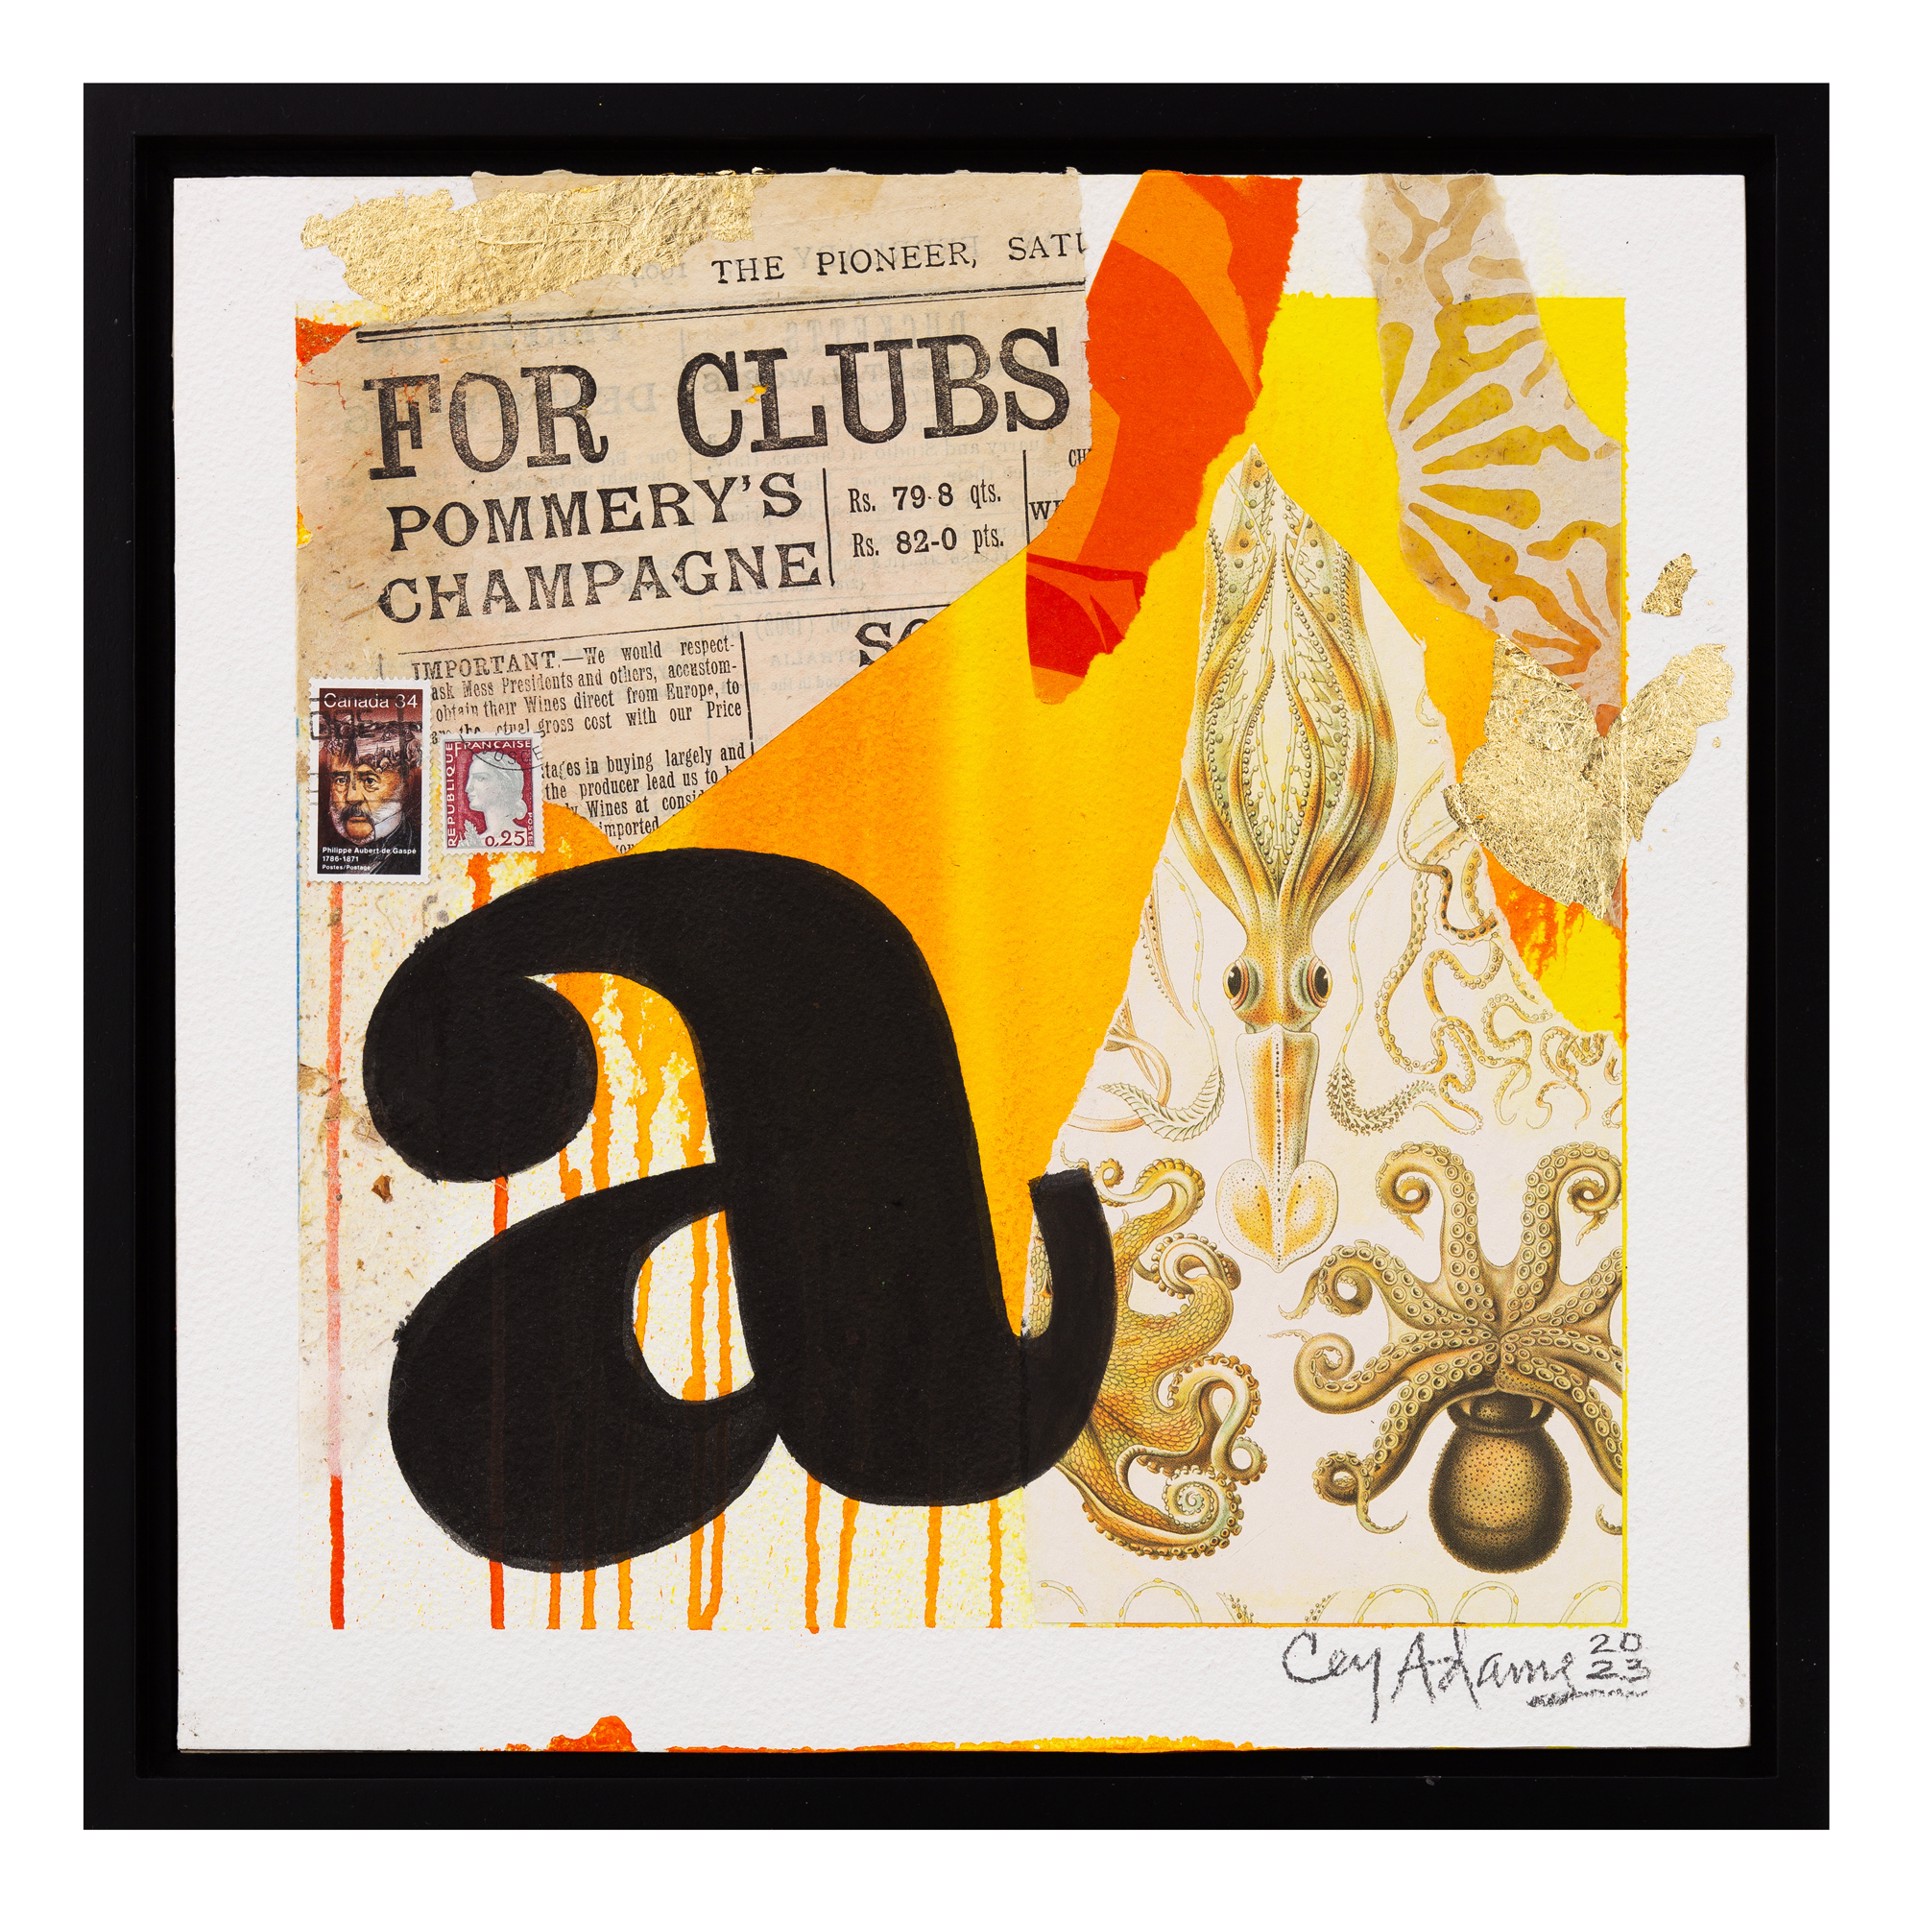 A FOR CLUBS by Cey Adams